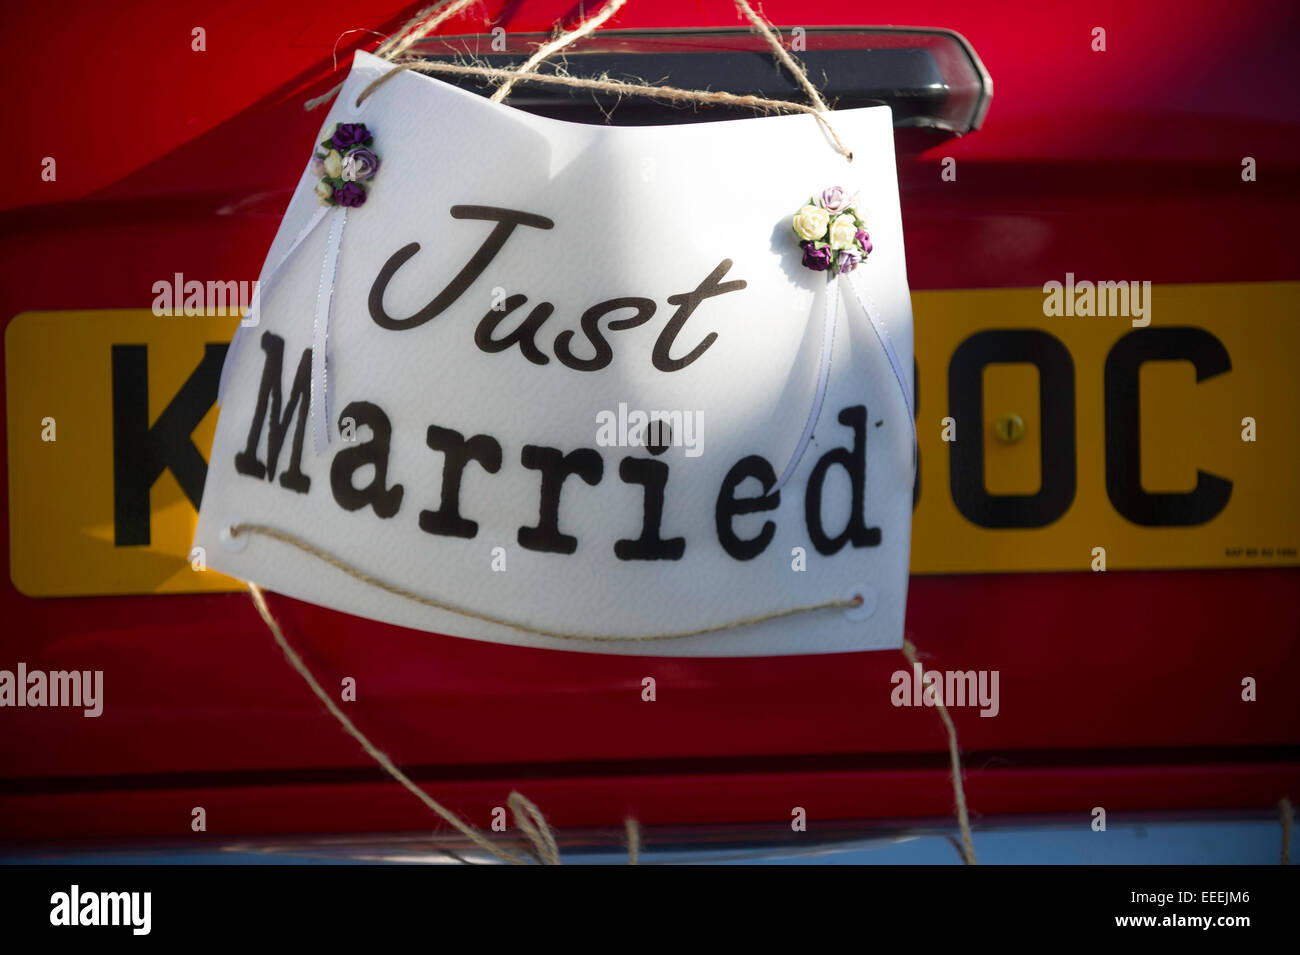 Just married sign Stock Photo